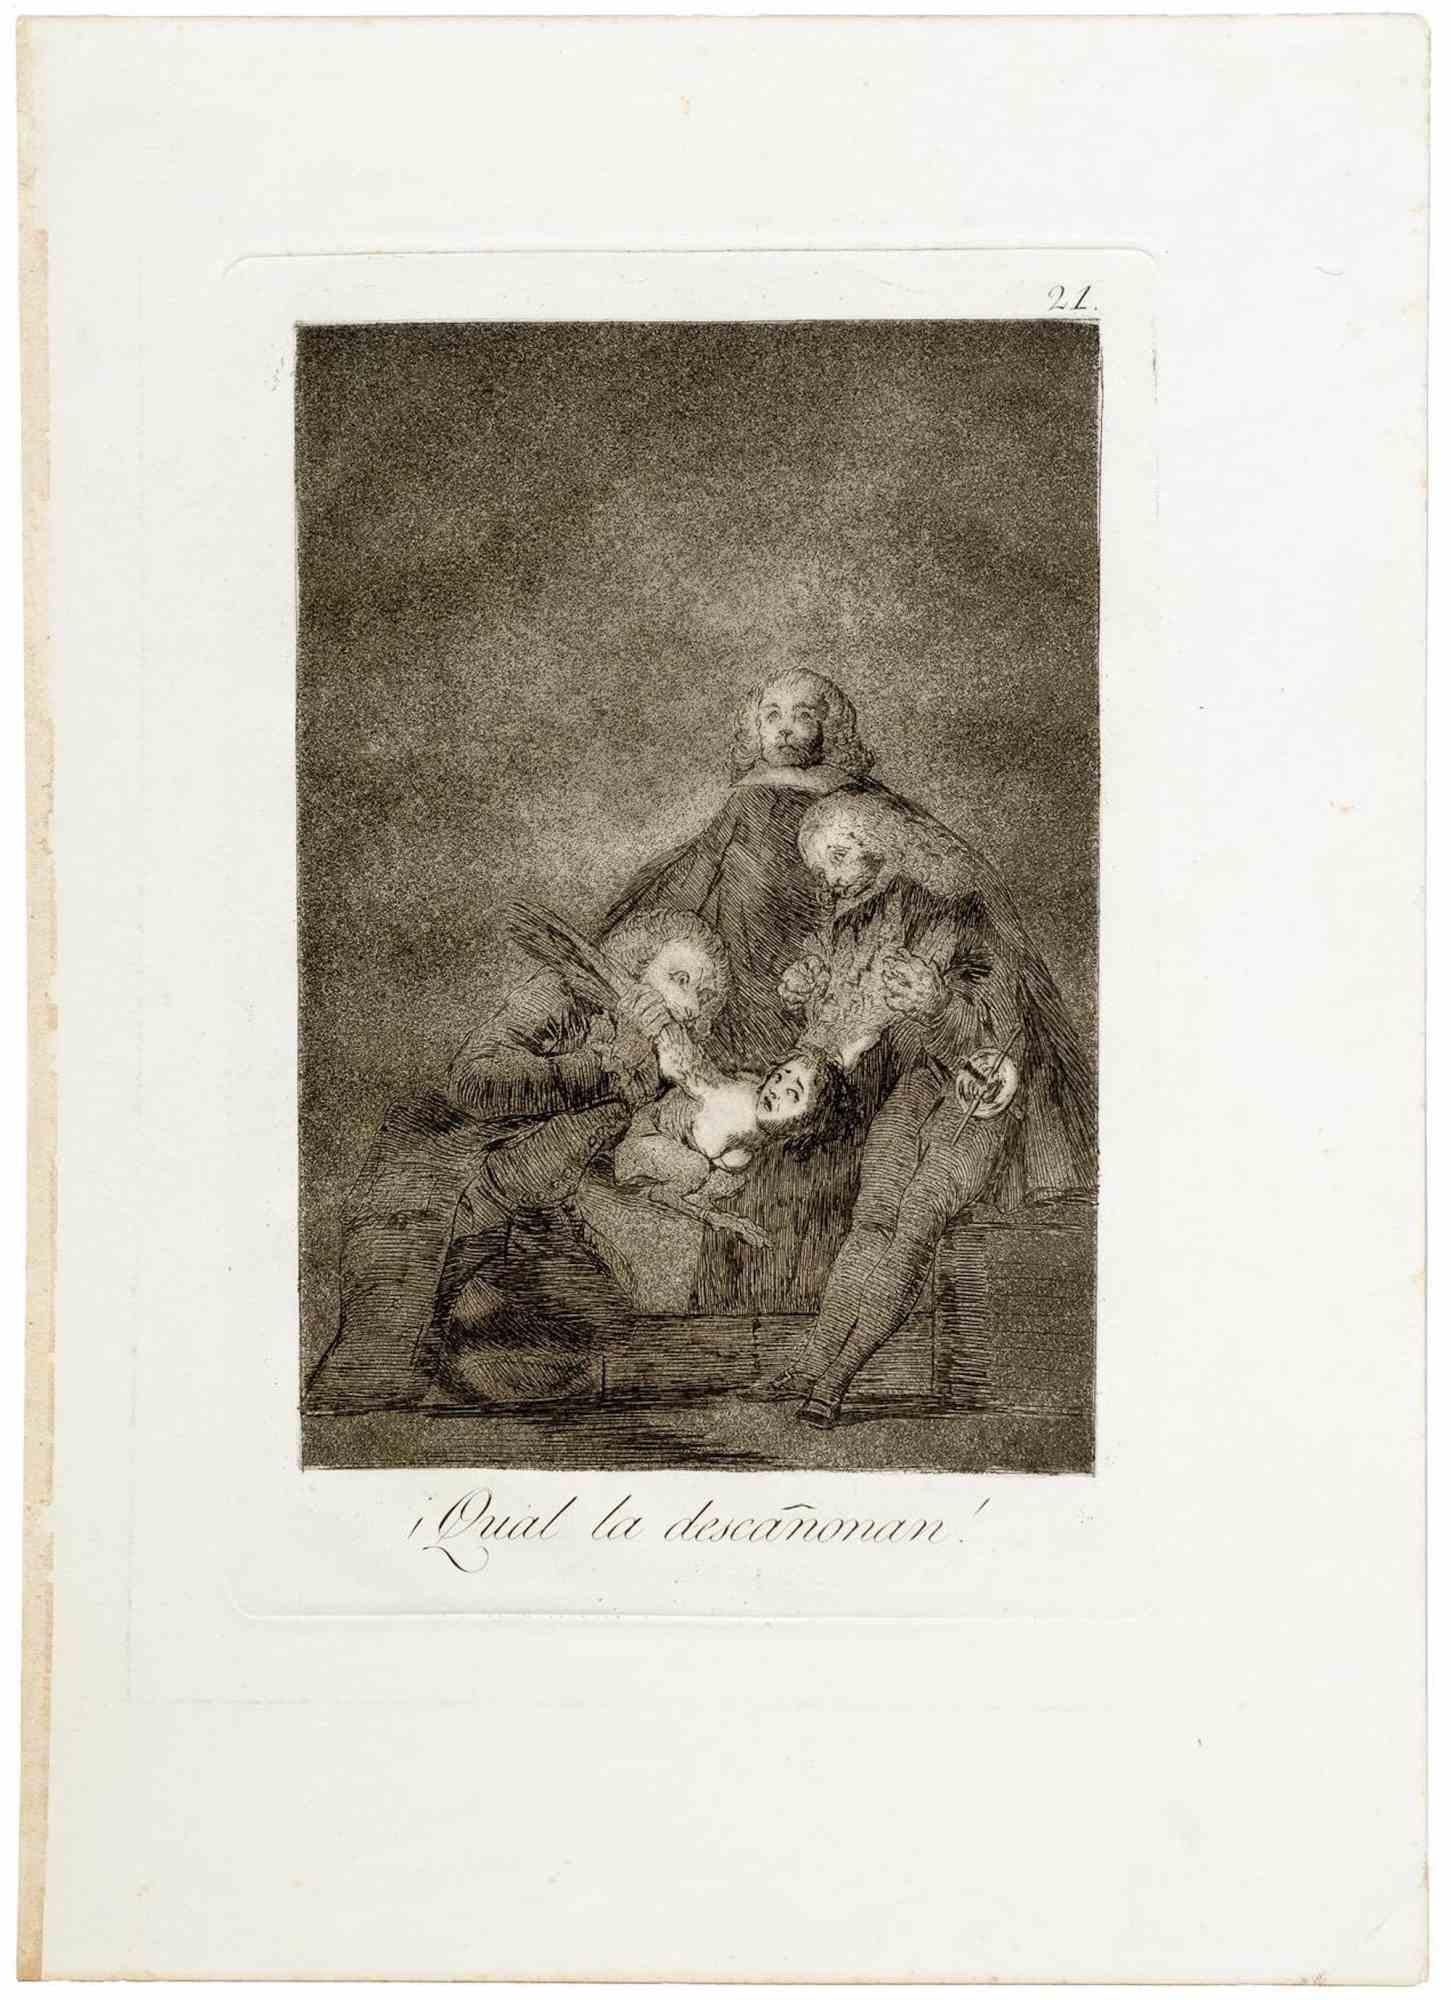 Qual la descanonan is a modern artwork realized by Francisco Goya, and published as third edition in 1868 by the Calcografia Nacional.

Black and white etching and burnished aquatint

Dimensions: Image 20 x 15 cm Sheet 29 x 21 cm.

The artwork is